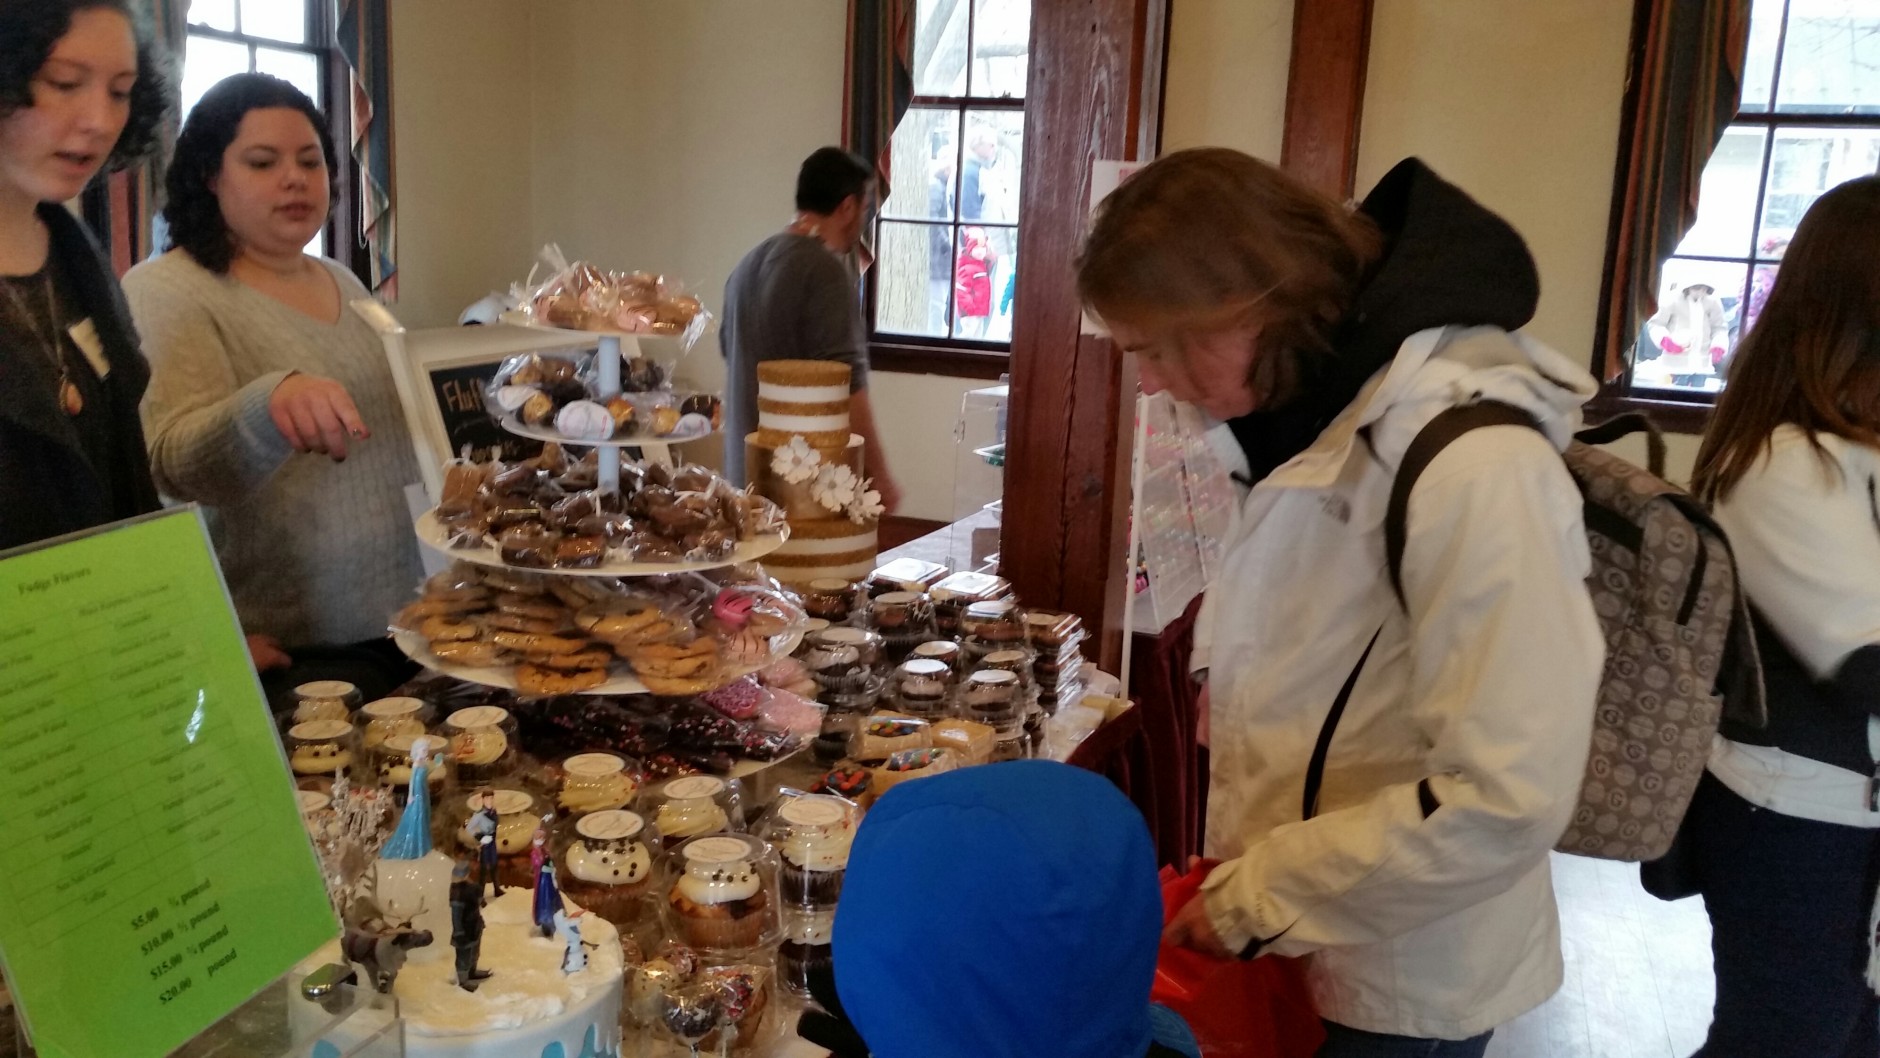 Two floors of Fairfax's Old Town Hall were filled with chocolate vendors. (WTOP/Kathy Stewart)